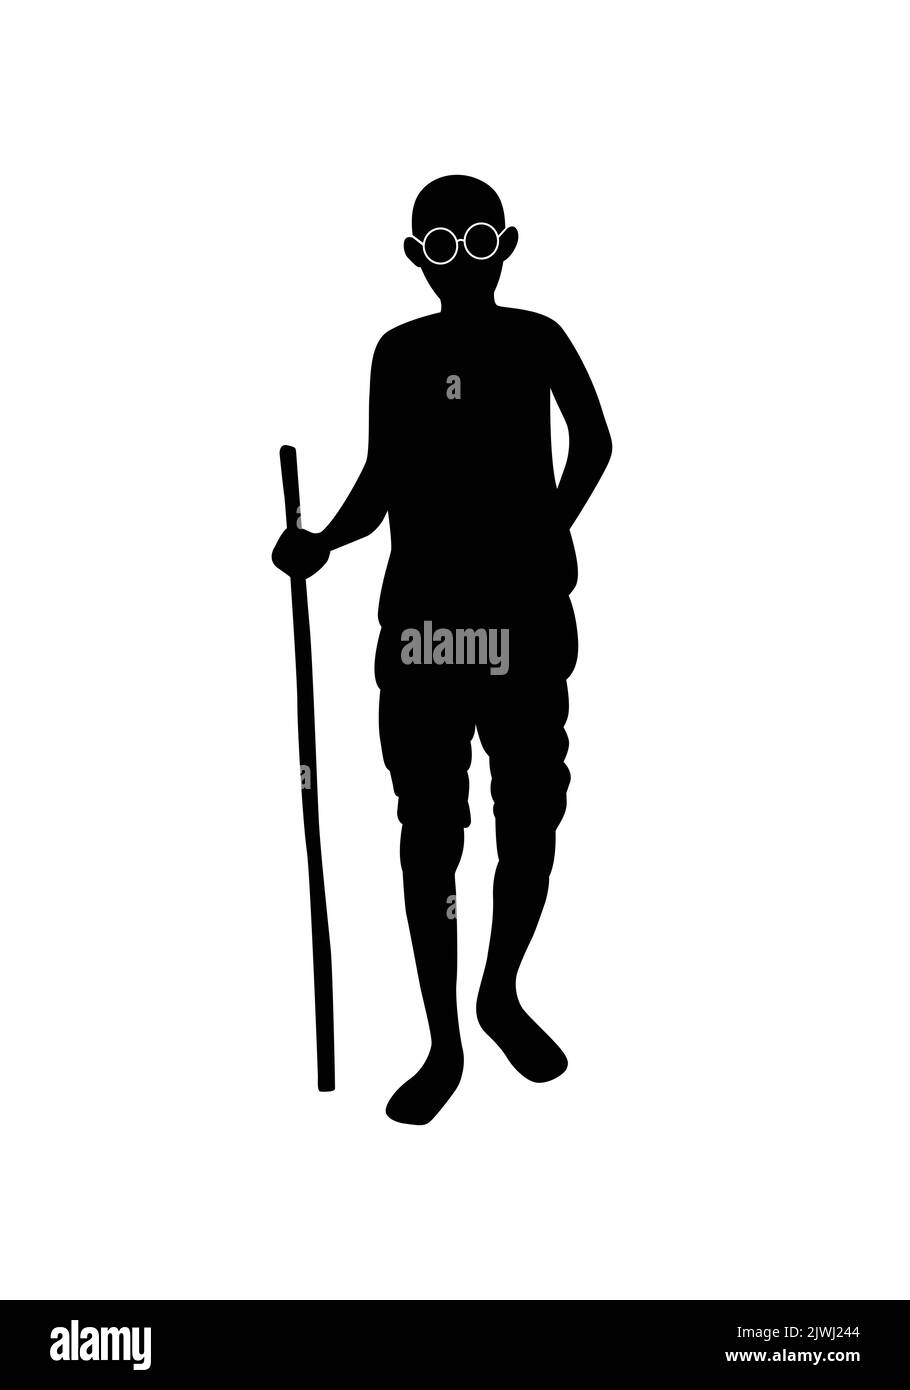 Happy Gandhi Jayanti graphic resource with walking stick glasses or spectacles vector illustration. Gandhi Ji standing silhouette. Dandi or Salt march Stock Vector